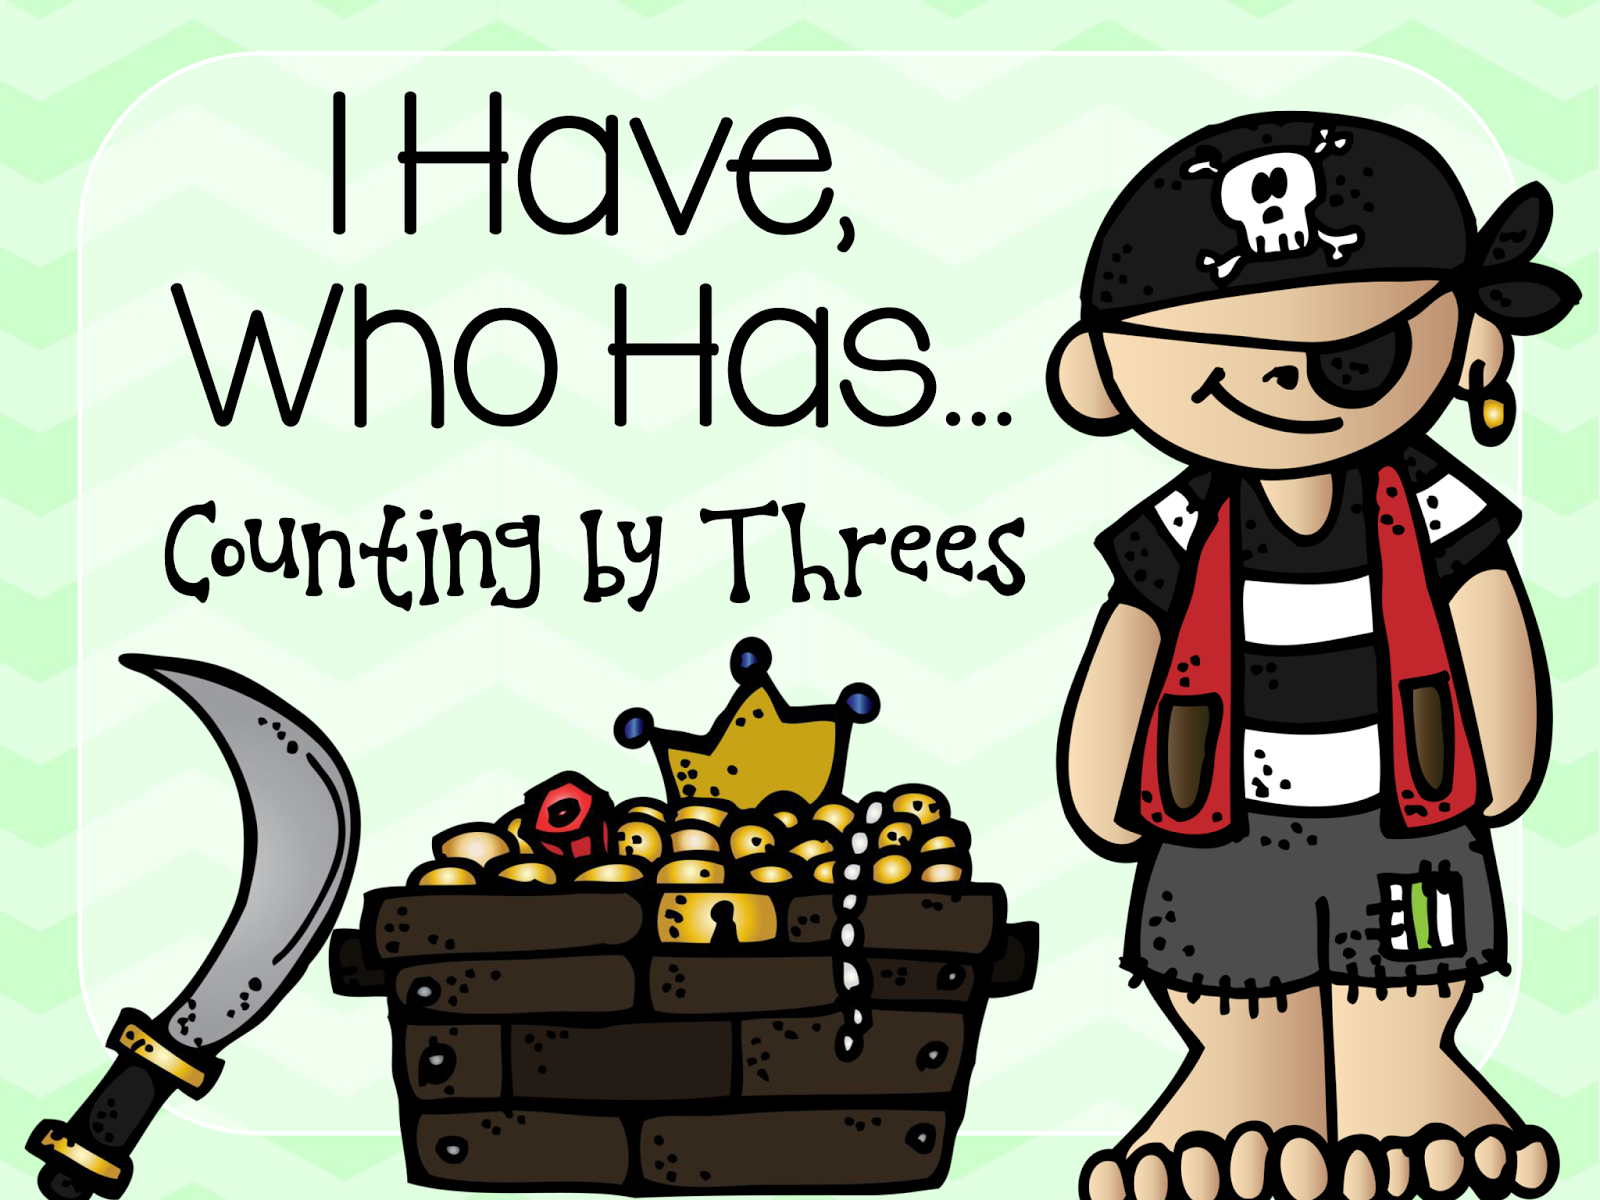 http://www.teachersnotebook.com/product/preciousmoments84/i-have-who-has-counting-by-threes